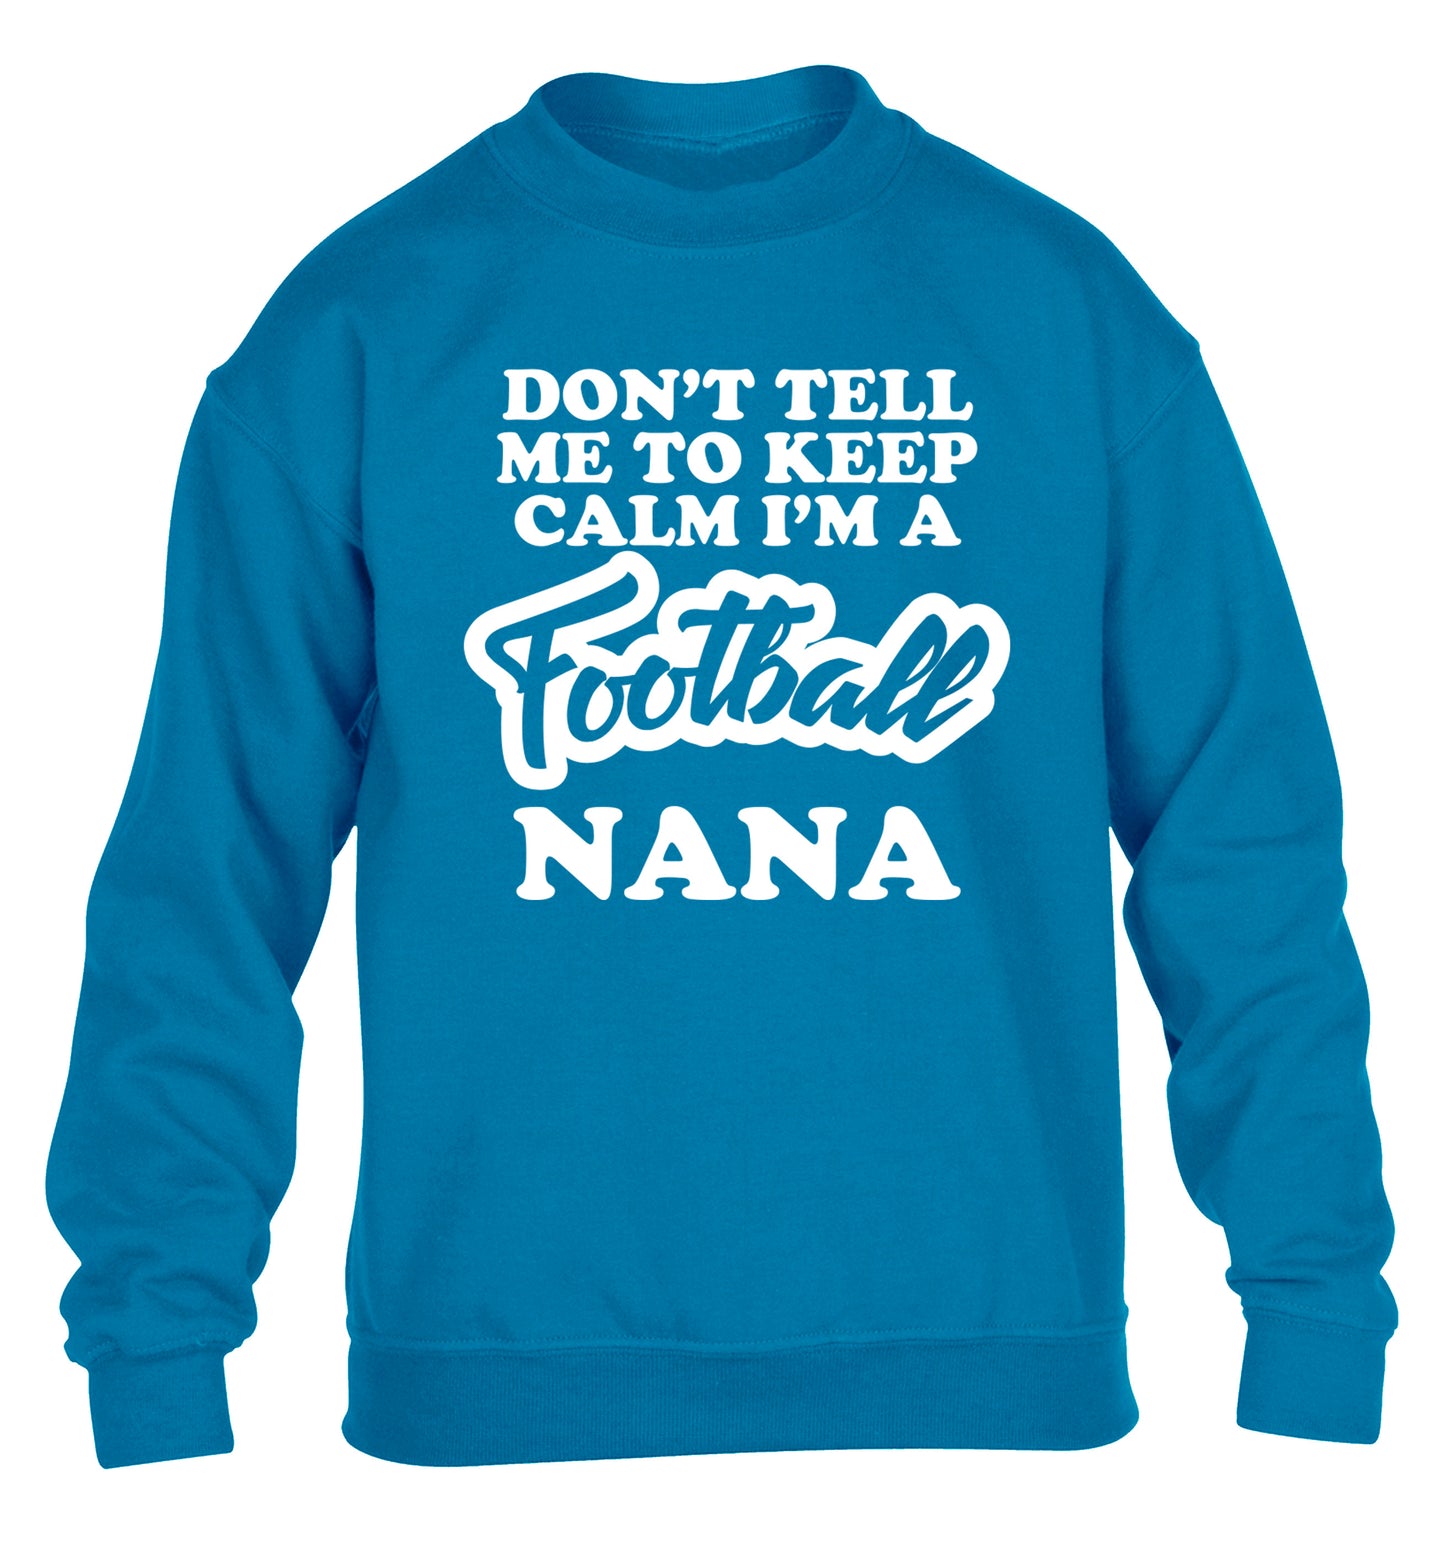 Don't tell me to keep calm I'm a football nana children's blue sweater 12-14 Years